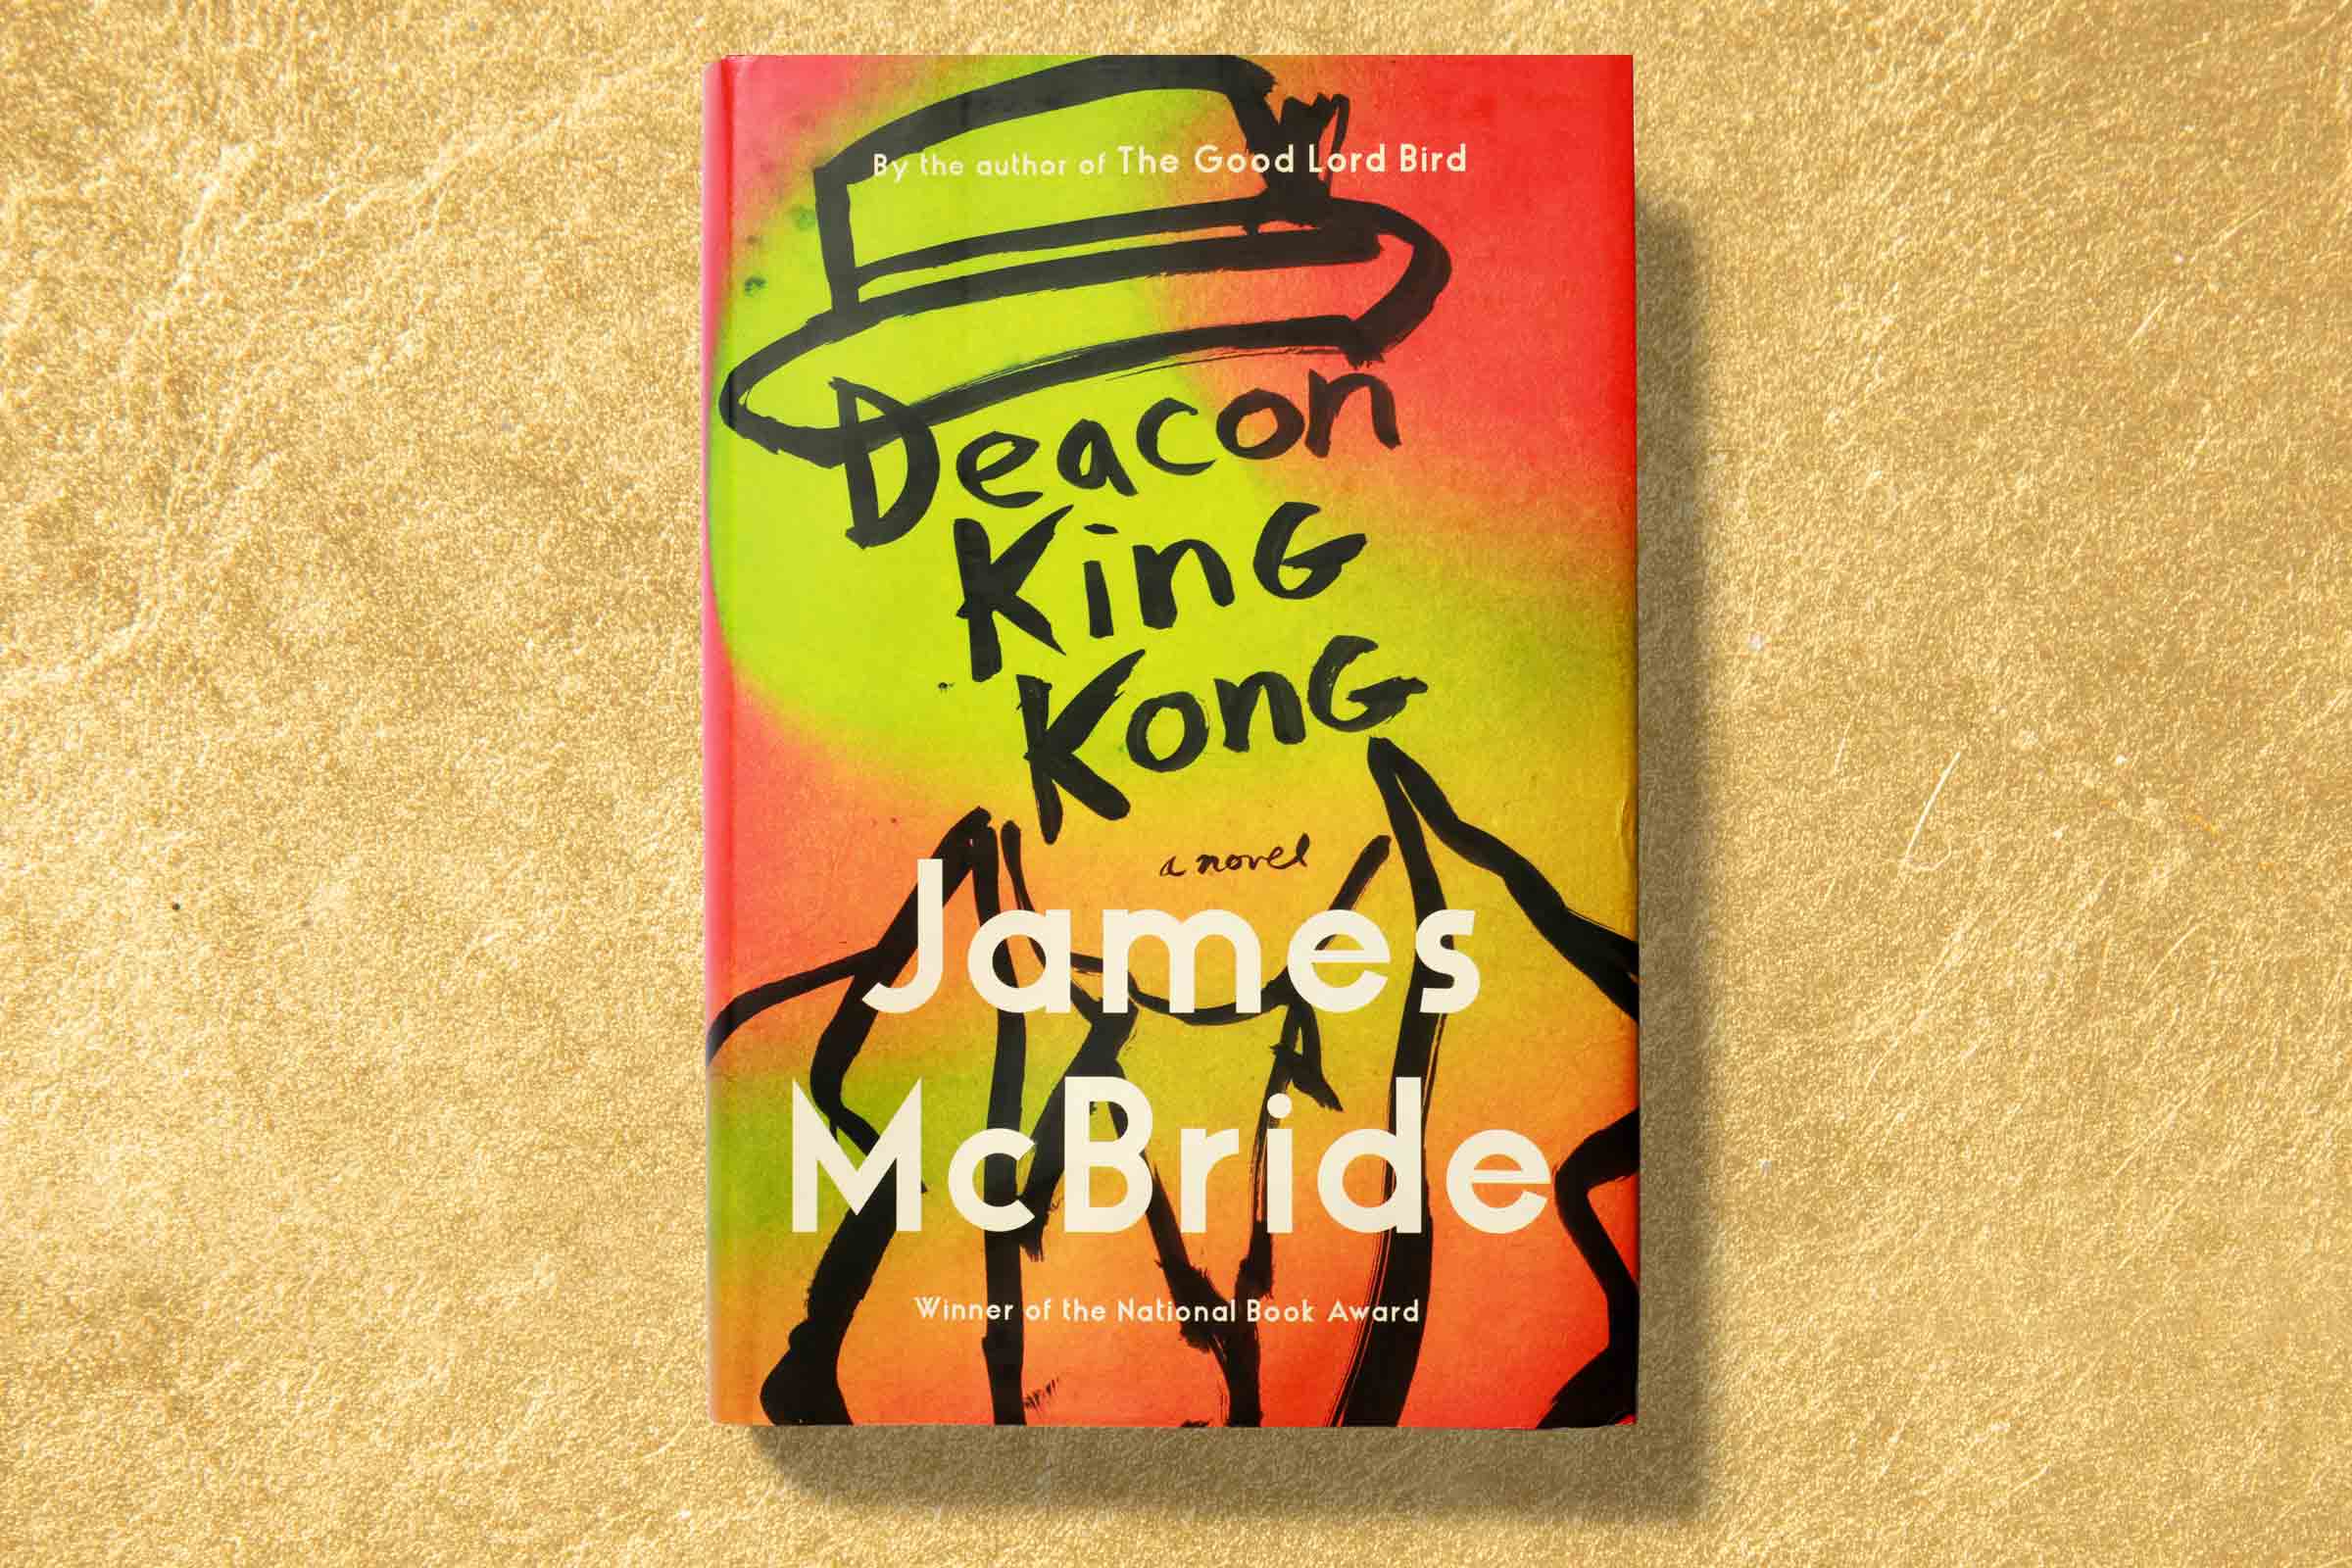 McBride's novel is a rich and vivid multicultural history